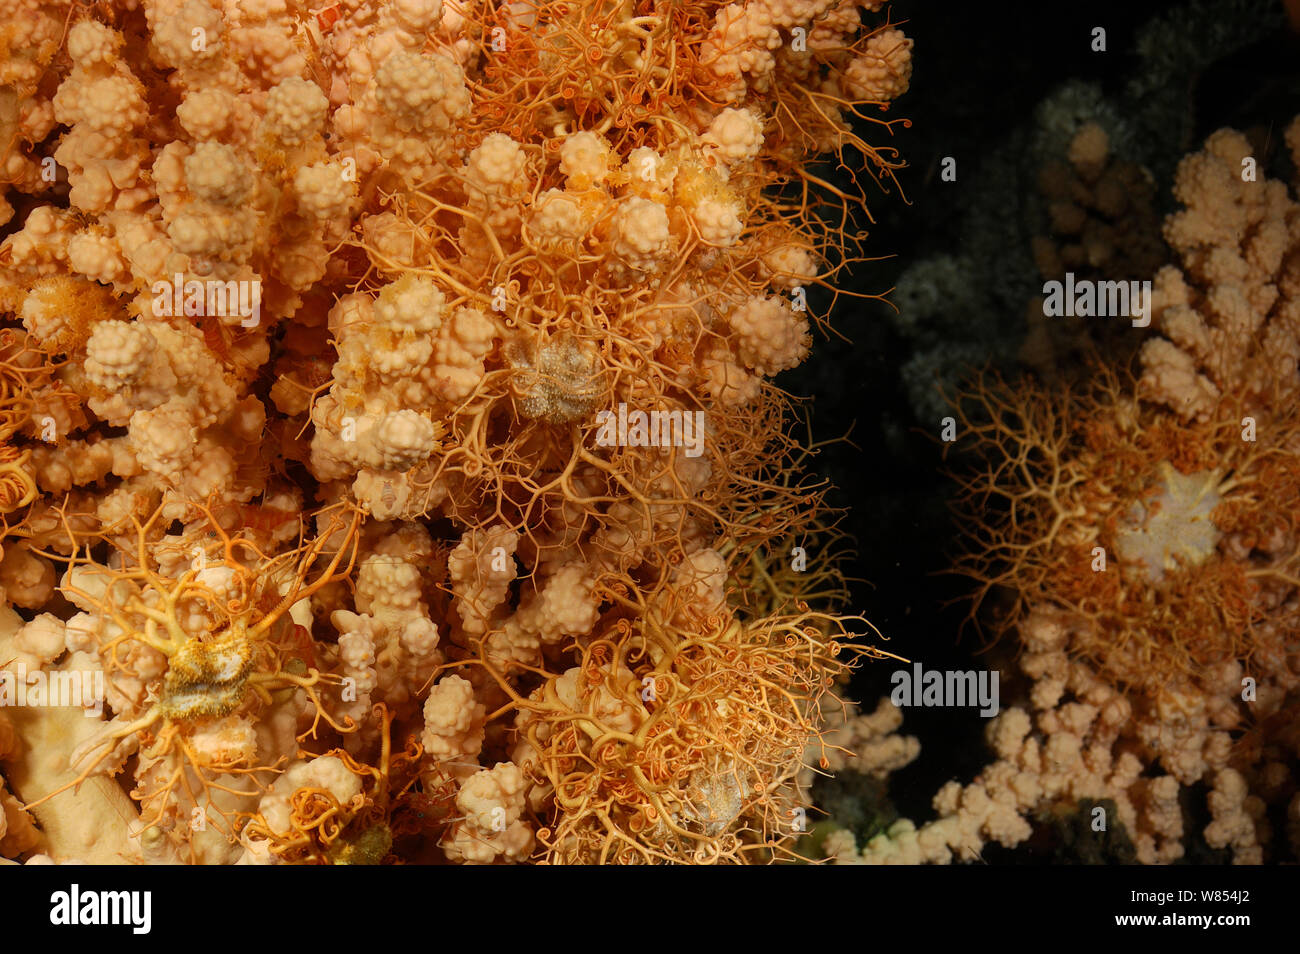 Bubblegum coral (Paragorgia arborea) with basket star (Gorgonocephalus caputmedusae) with a live coral (Lophelia pertusa), reef in Trondheimfjord, North Atlantic Ocean, Norway . Photo taken in cooperation with GEOMAR coldwater coral research project Stock Photo